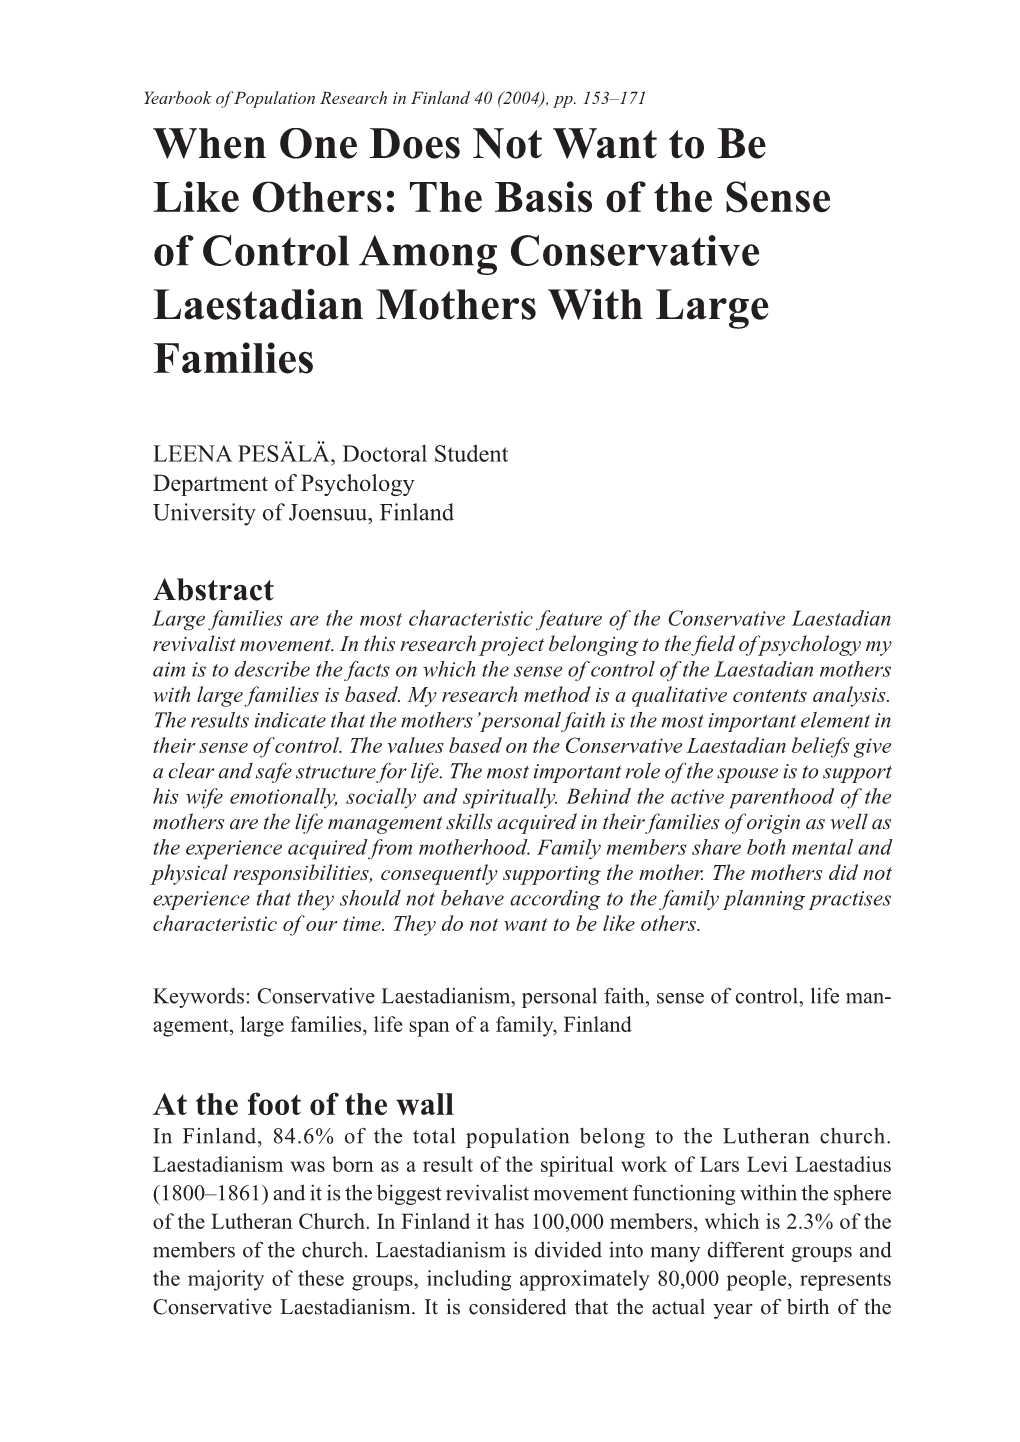 The Basis of the Sense of Control Among Conservative Laestadian Mothers with Large Families